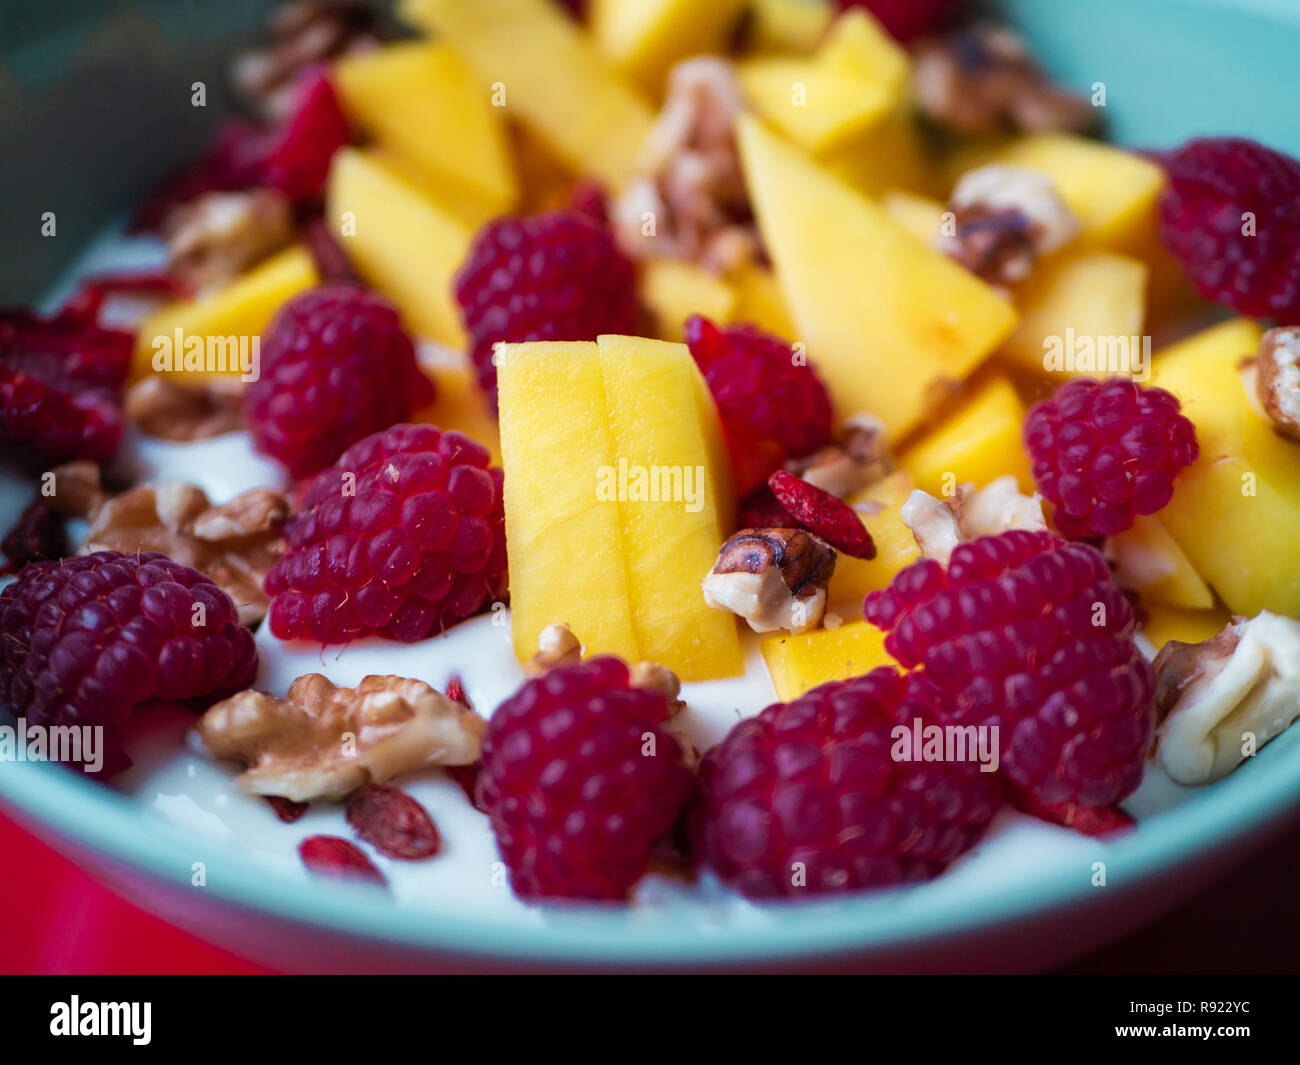 Delicious fruit bowl with mango, raspberry, goji berries and walnuts on red background Stock Photo